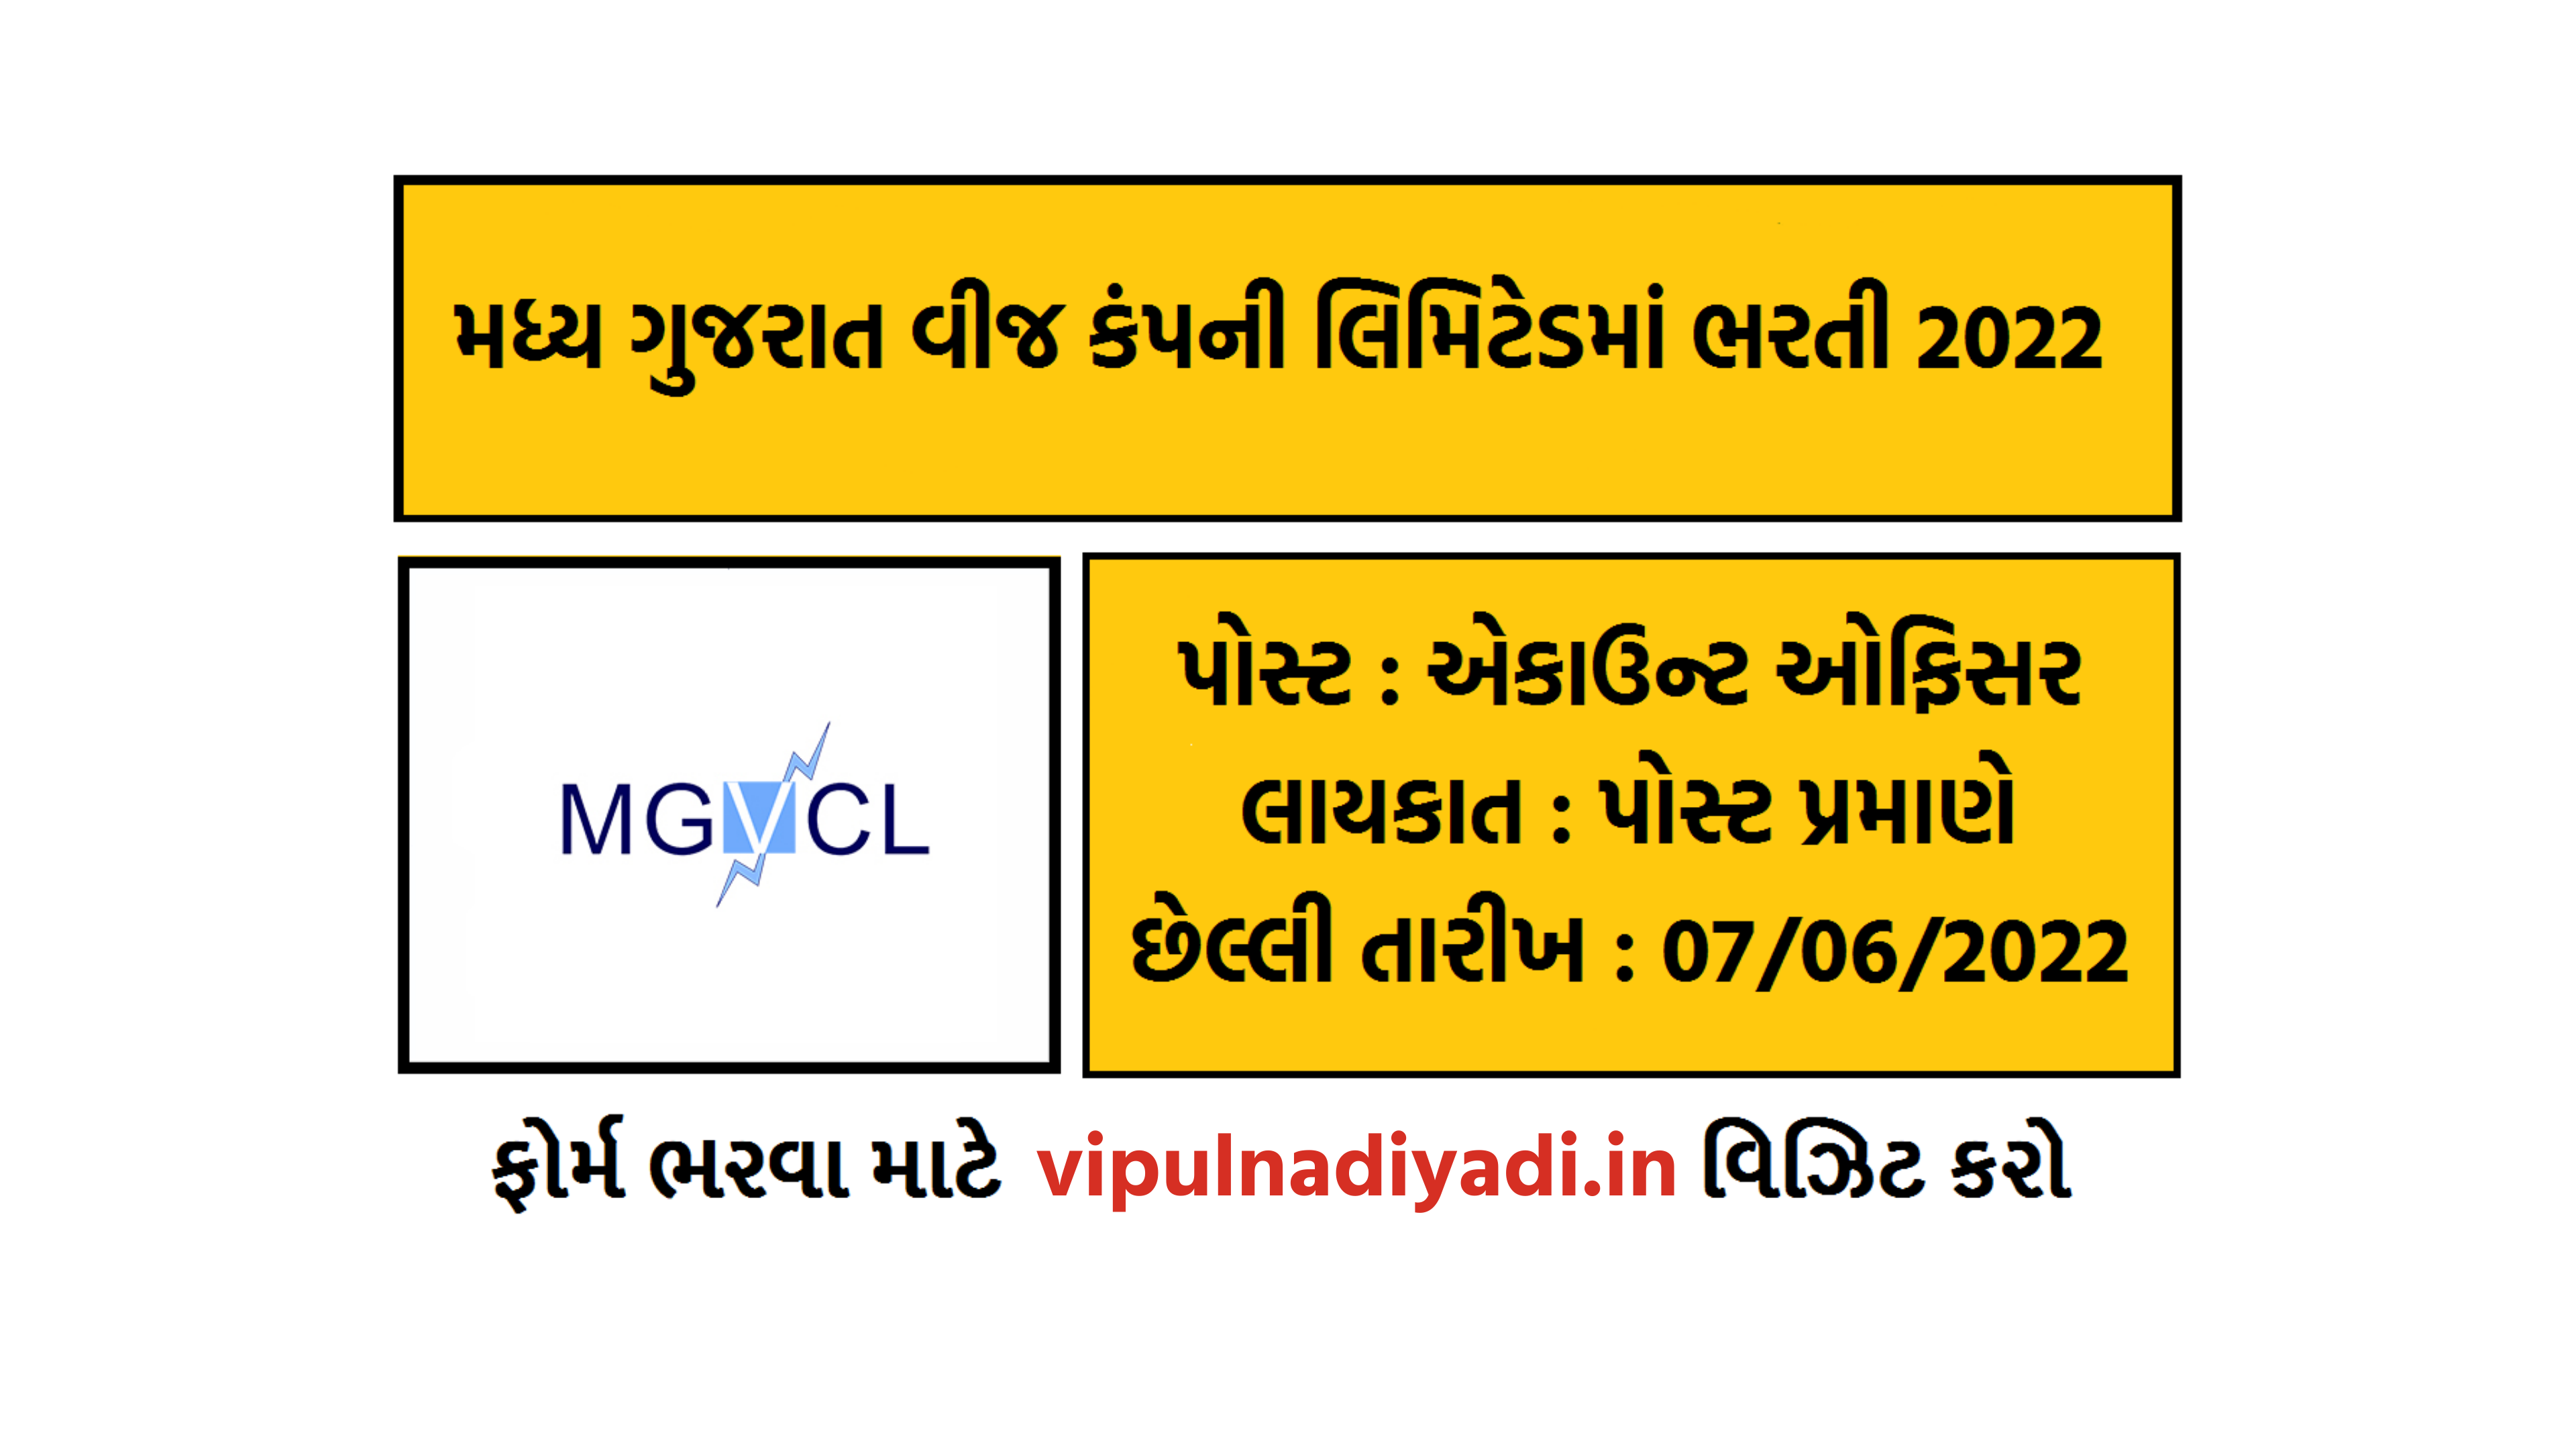 MGVCL Recruitment 2022